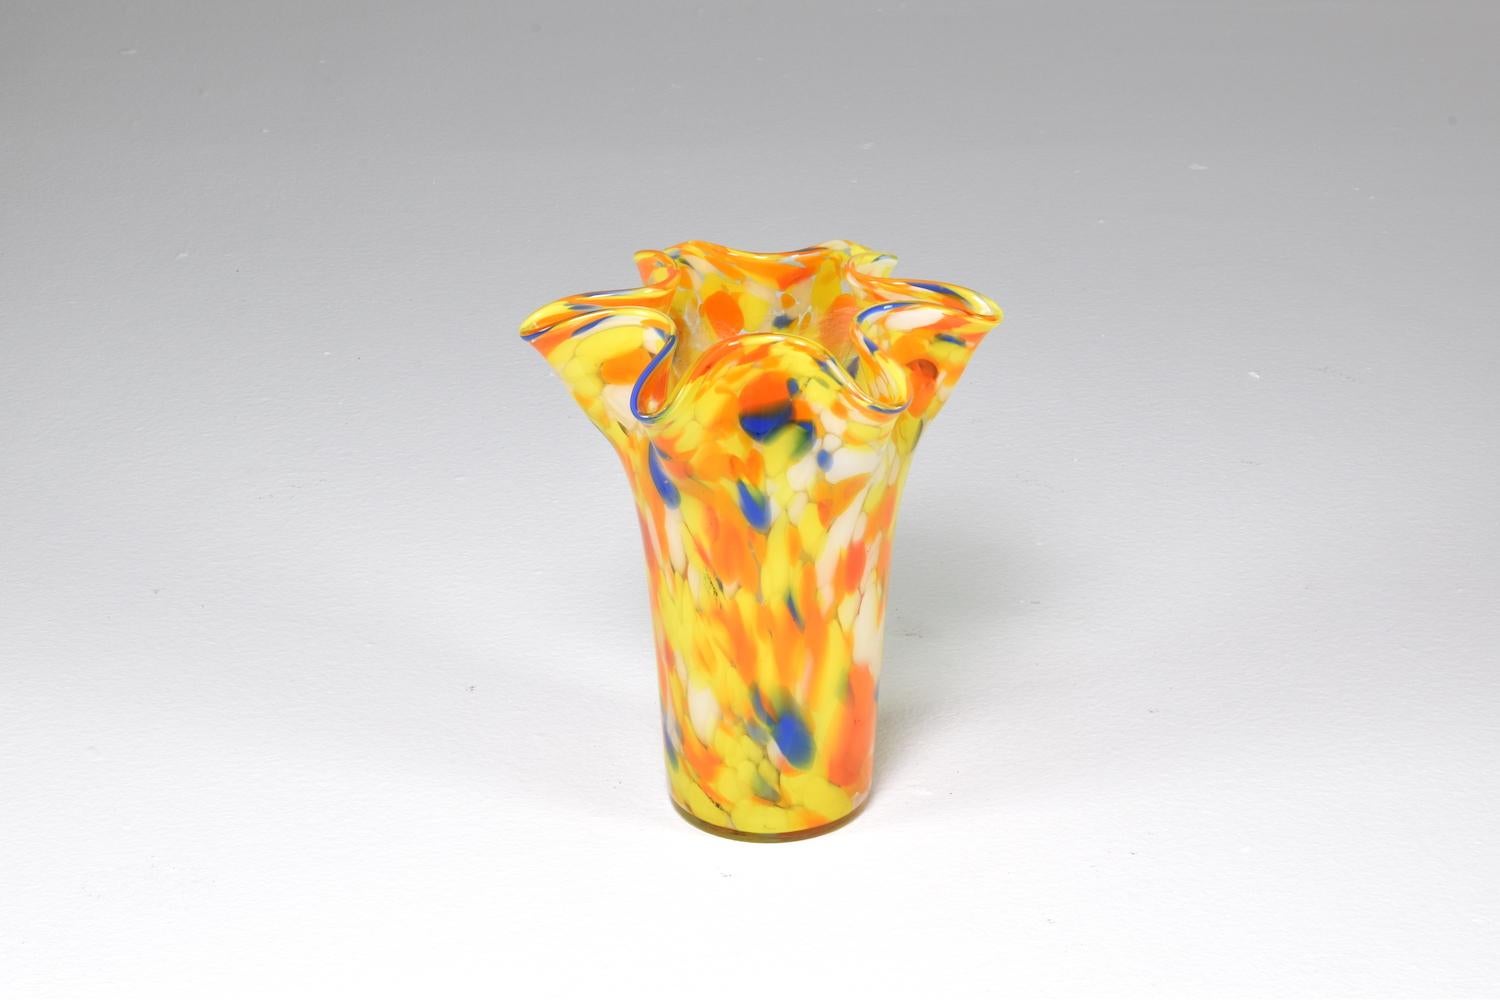 1970s Italian hand-blown glass vase, crafted with colourful specks of Murano-style glass in orange, yellow, white and blue tones all expertly blended together. 
This joyful decorative piece is designed in the form of a timeless antique vase and his